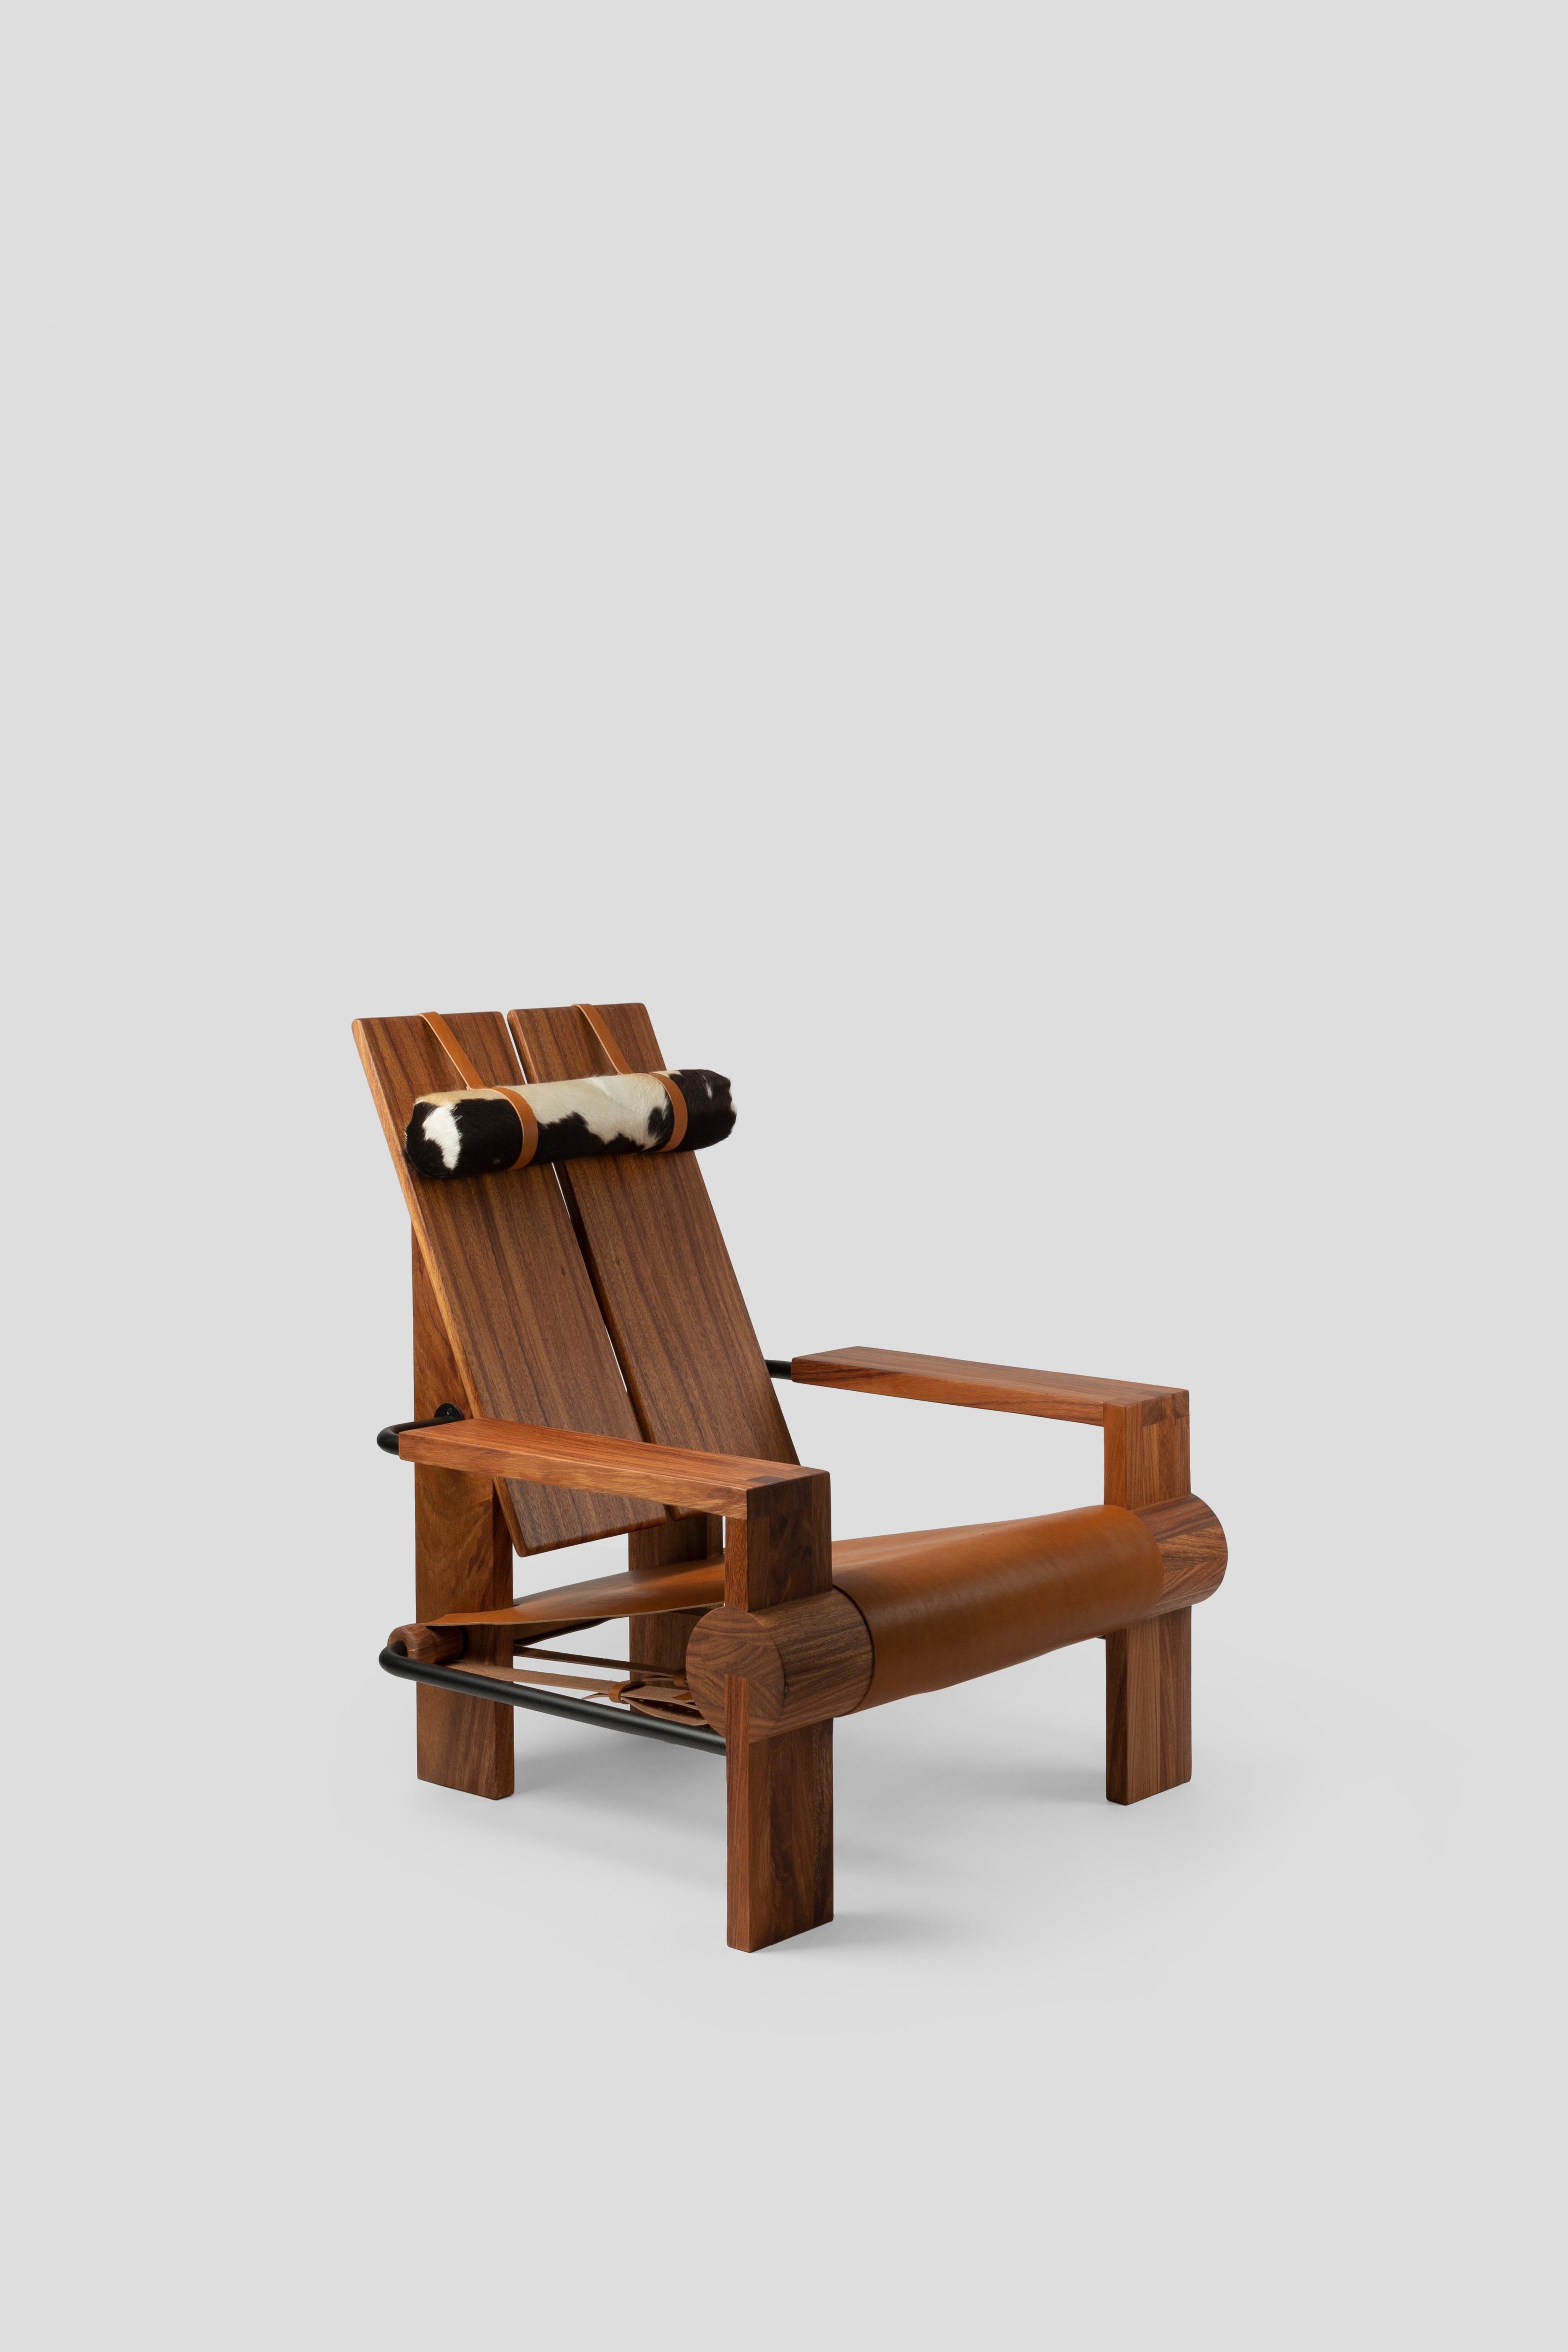 San Francisco chair, Leather and Dark Tropical Wood, Contemporary Mexican Design In New Condition For Sale In Mexico City, MX